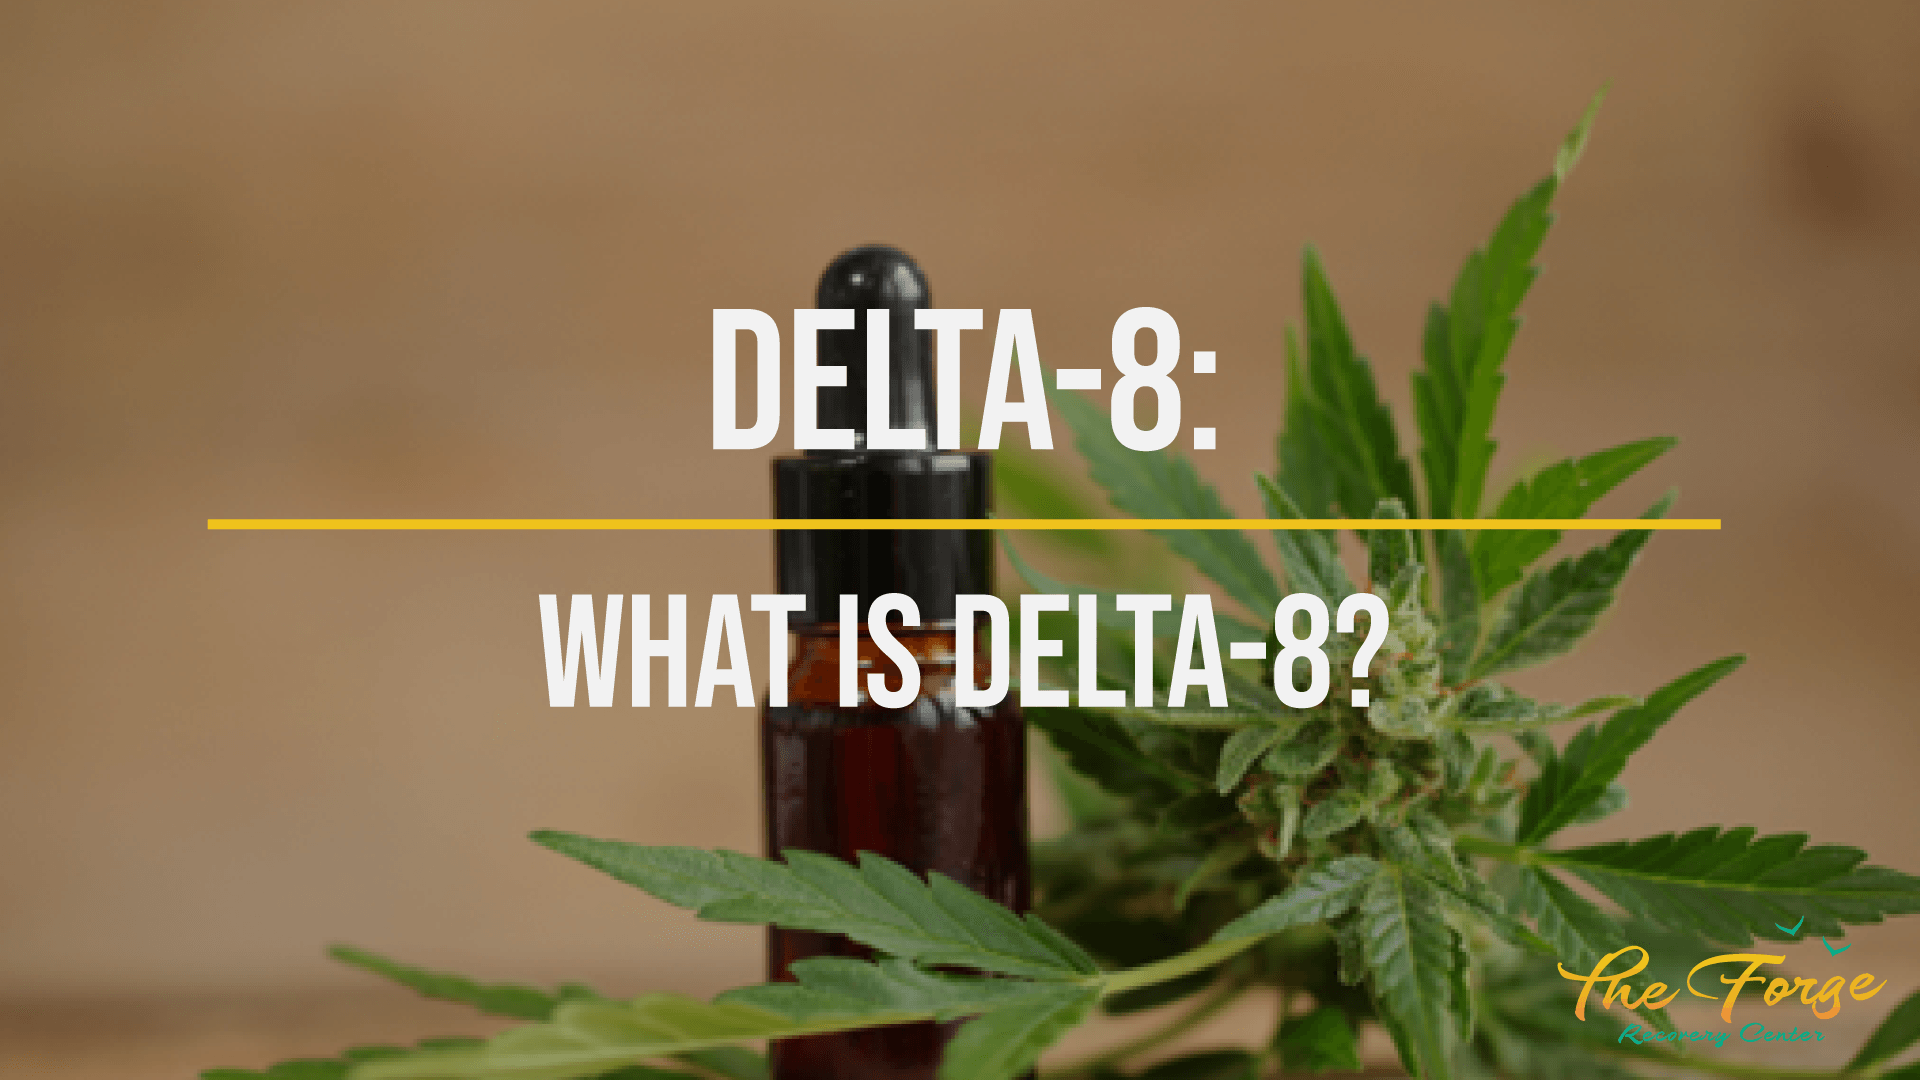 How Long Does a Delta-8 High Last?